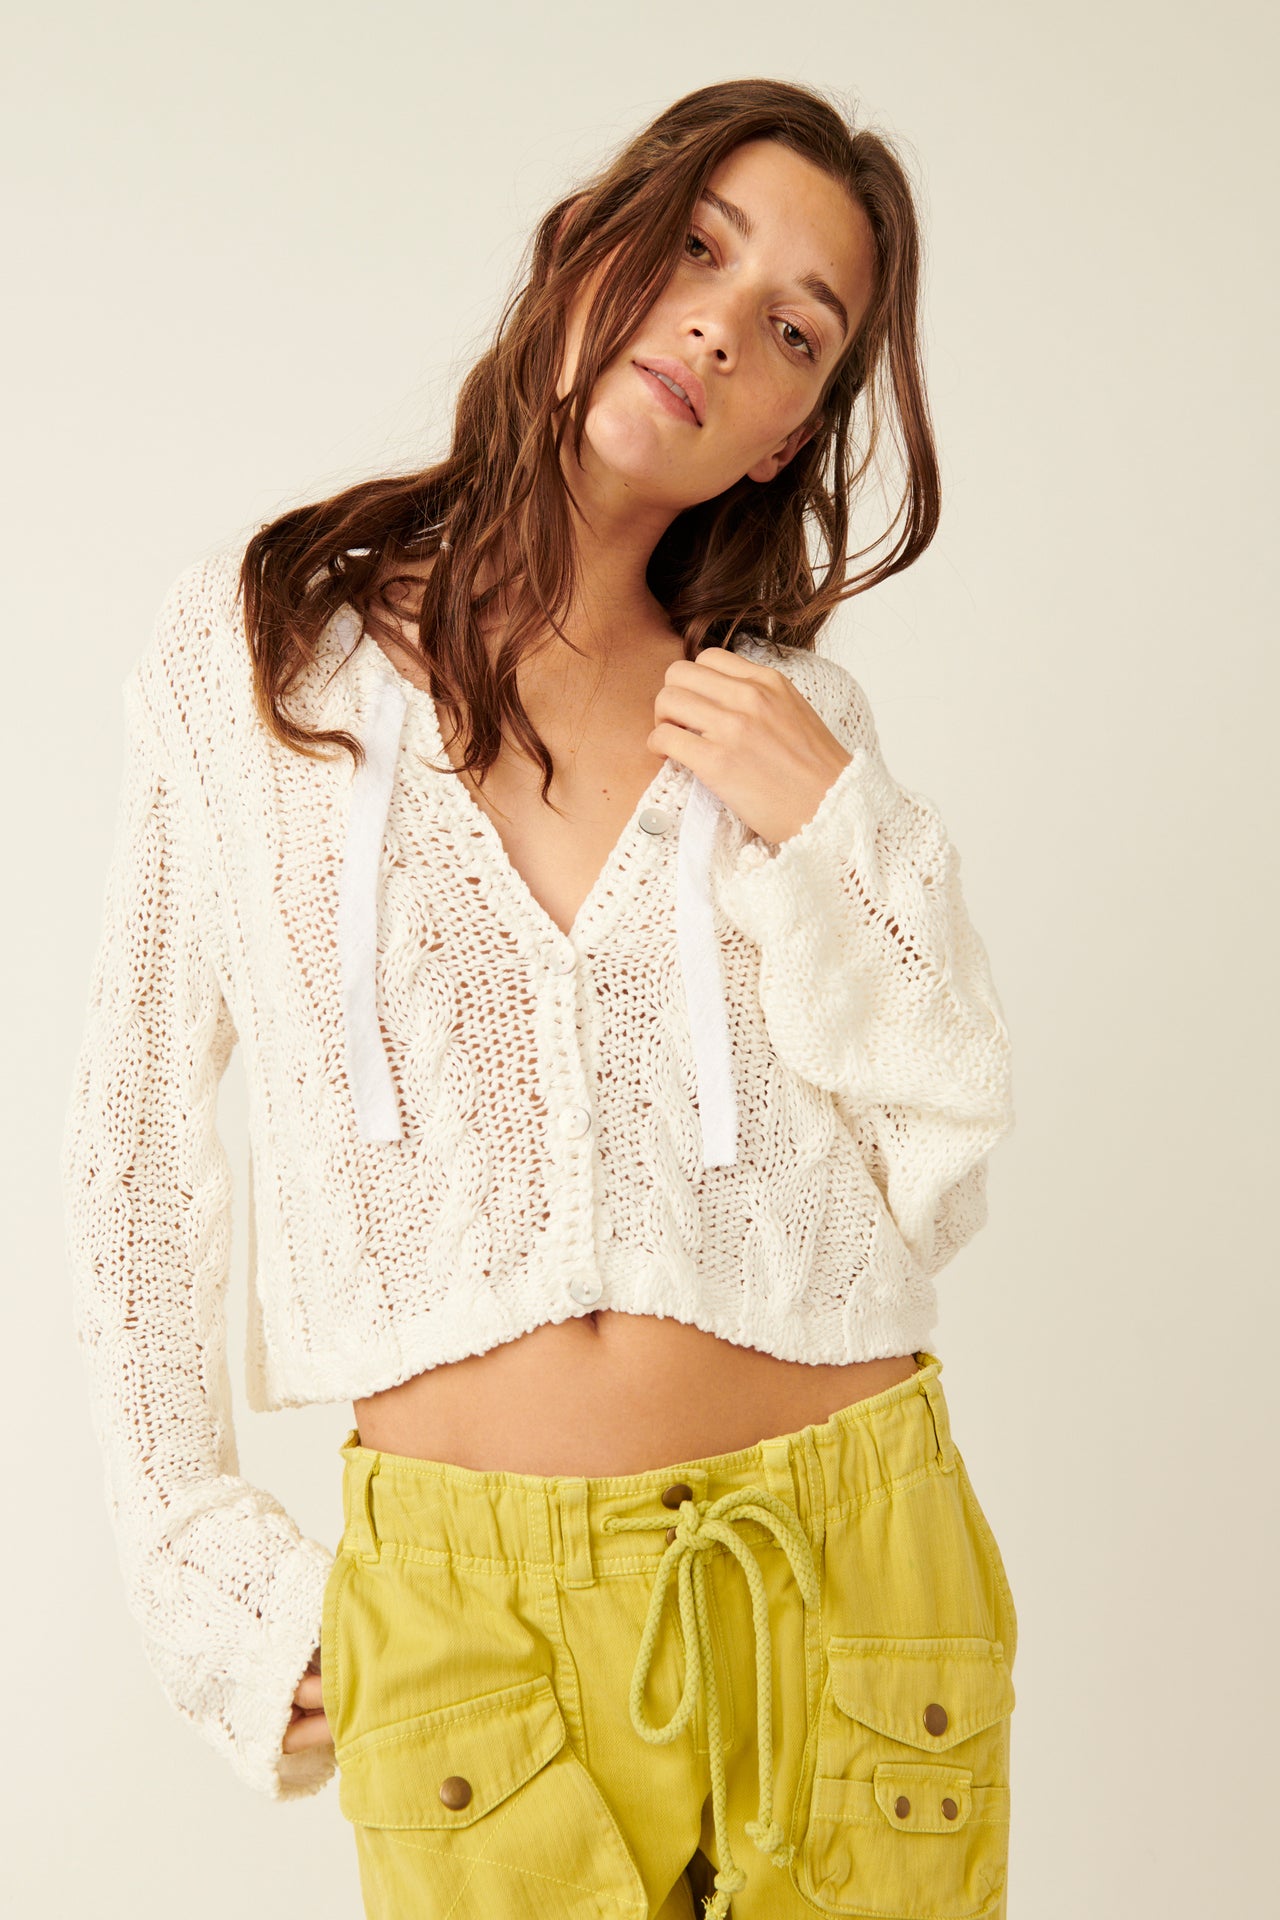 Robyn Cardi Bright White, Cardigan Sweater by Free People | LIT Boutique